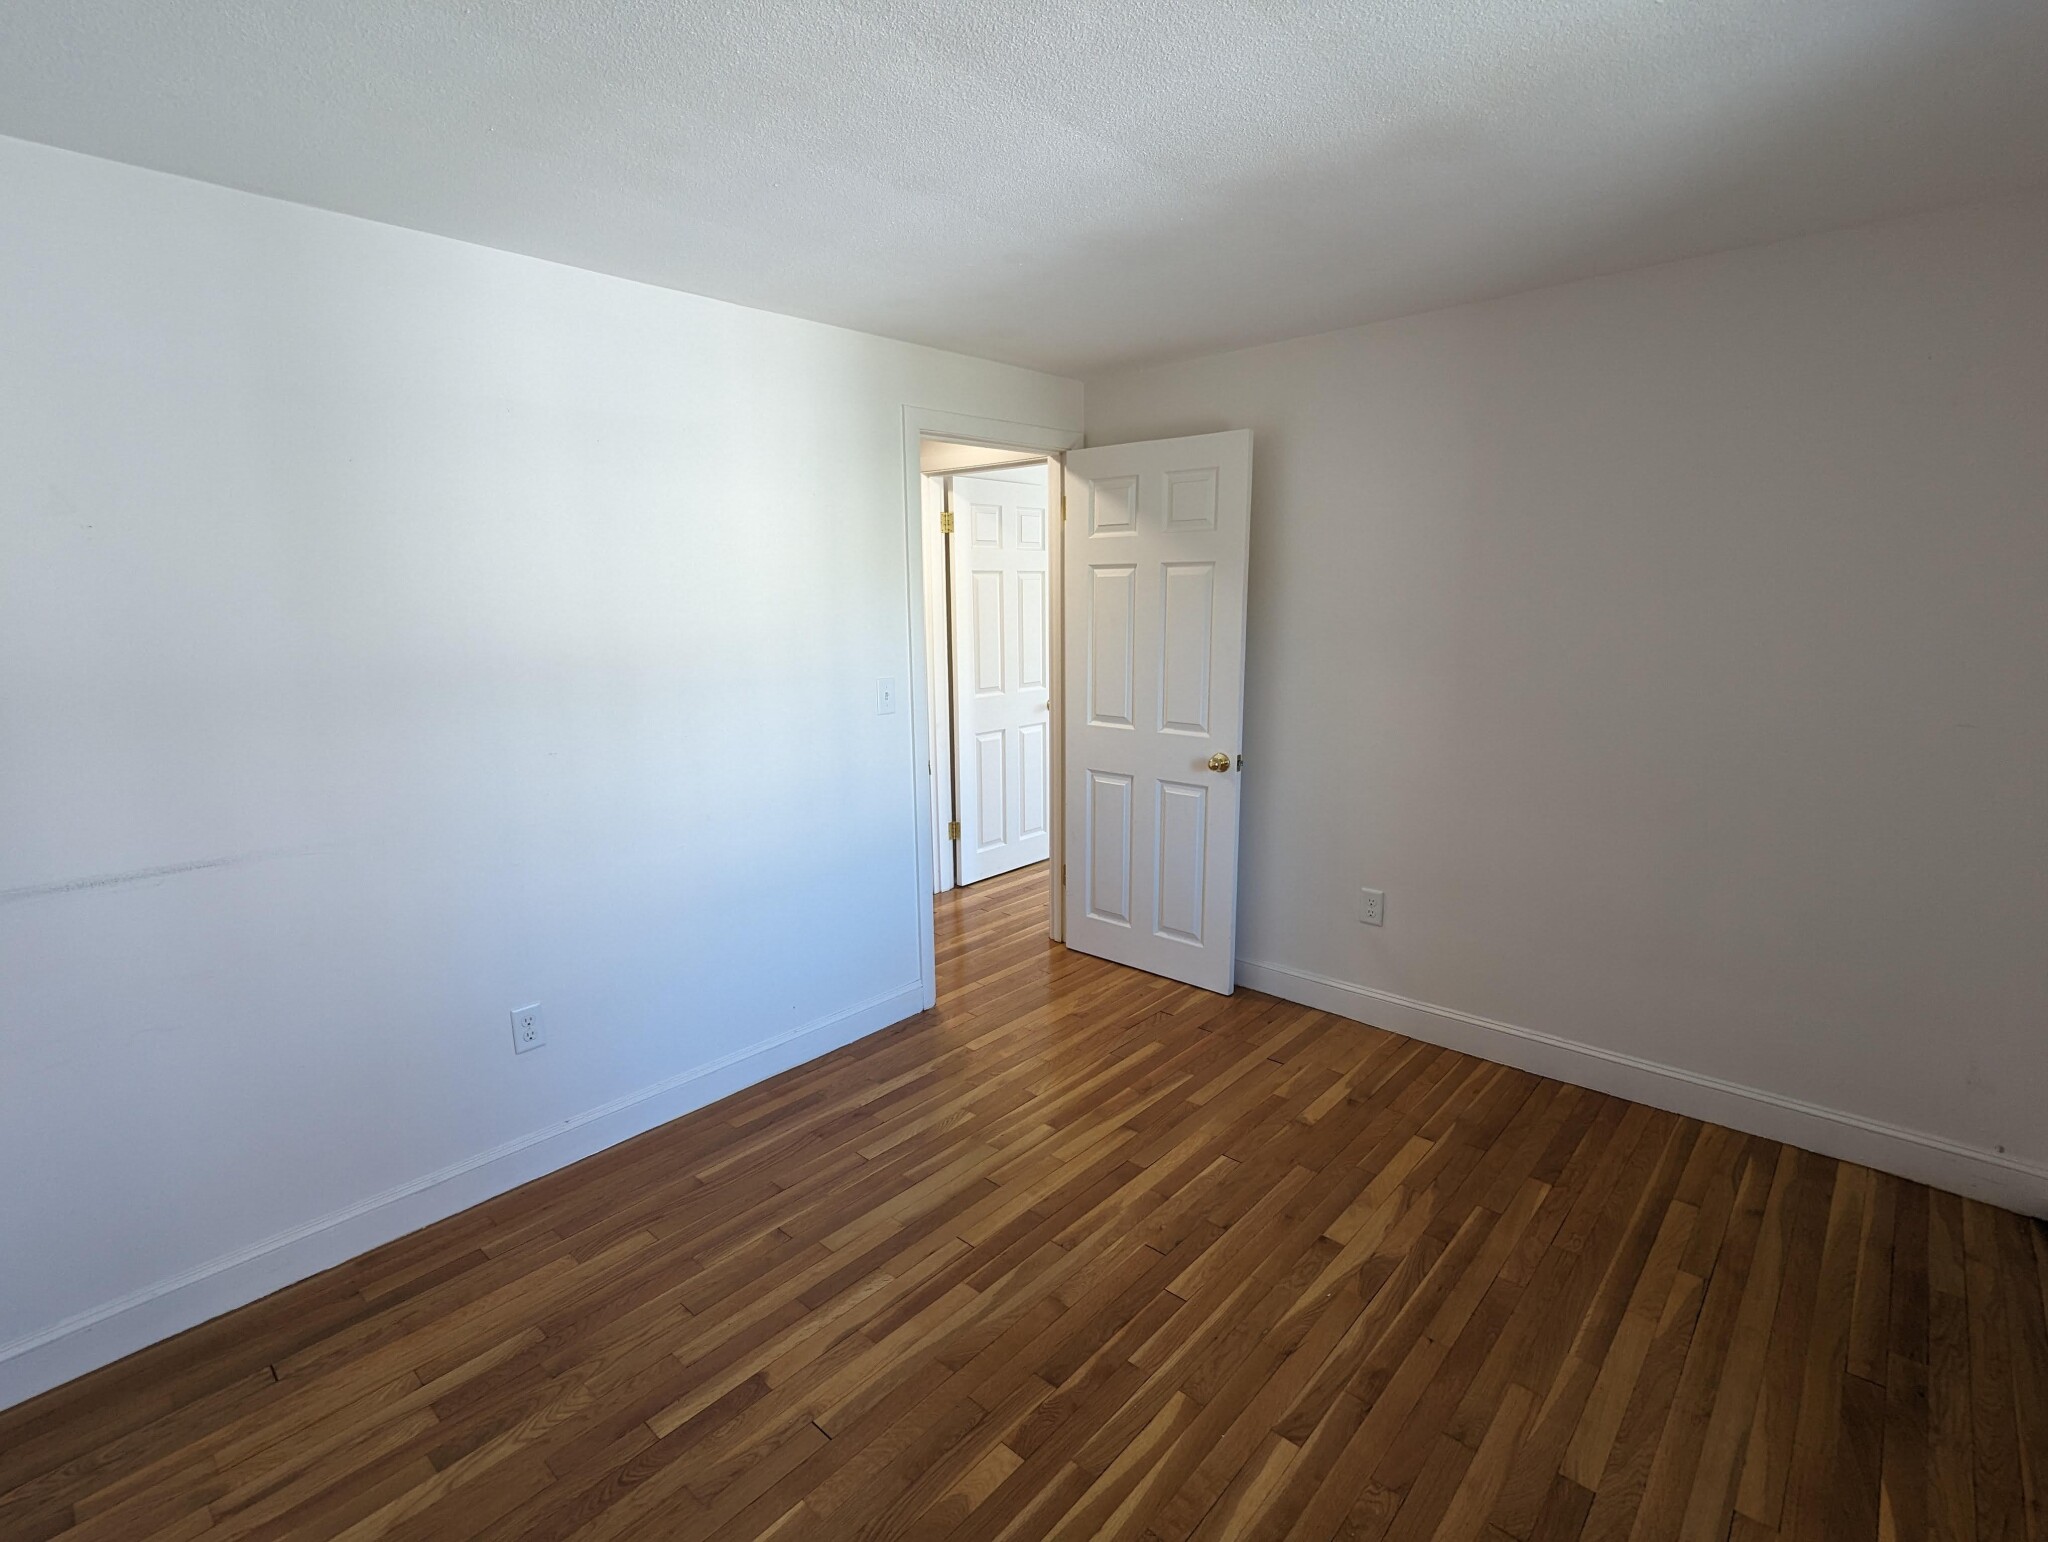 Photos of apartment on West Wyoming Ave.,Melrose MA 02176